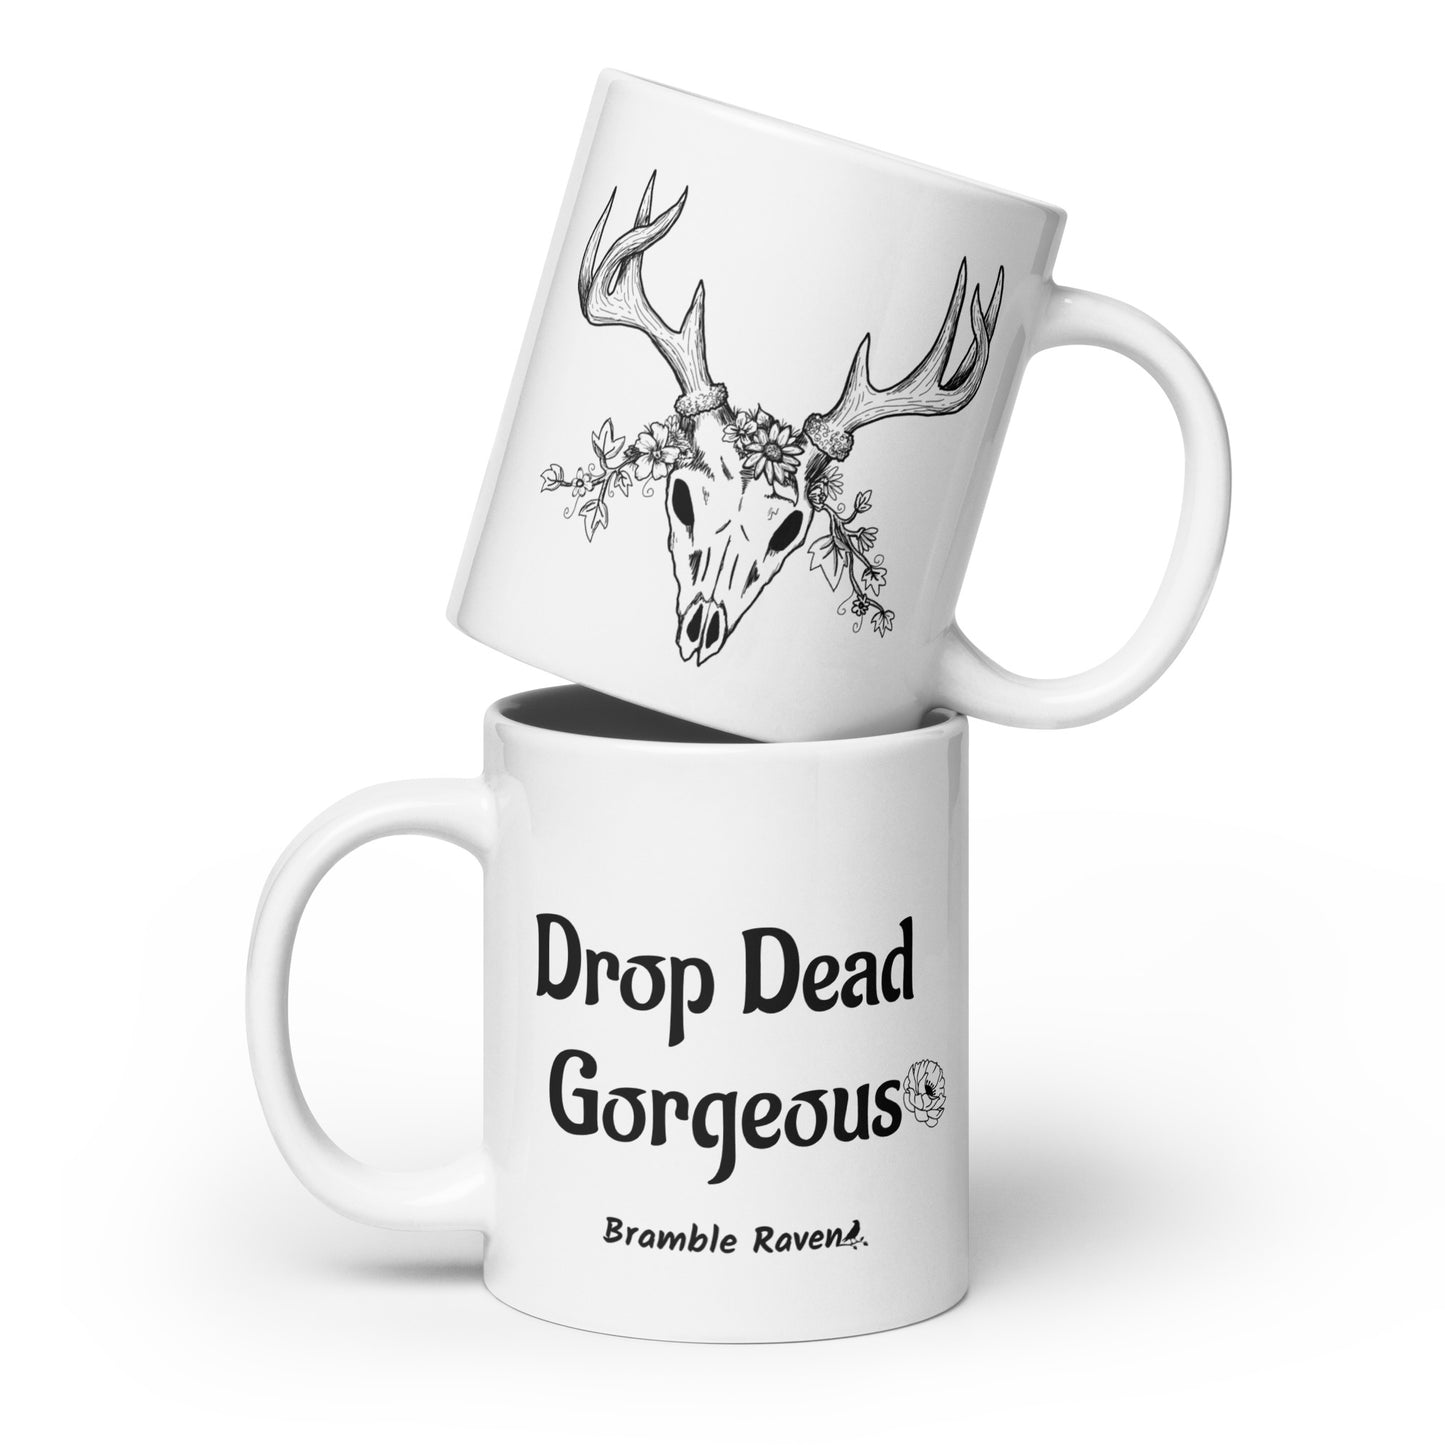 20 ounce white ceramic mug. Features illustrated deer skull wreathed in flowers on one side and Drop dead gorgeous text on the other side. Dishwasher and microwave safe.